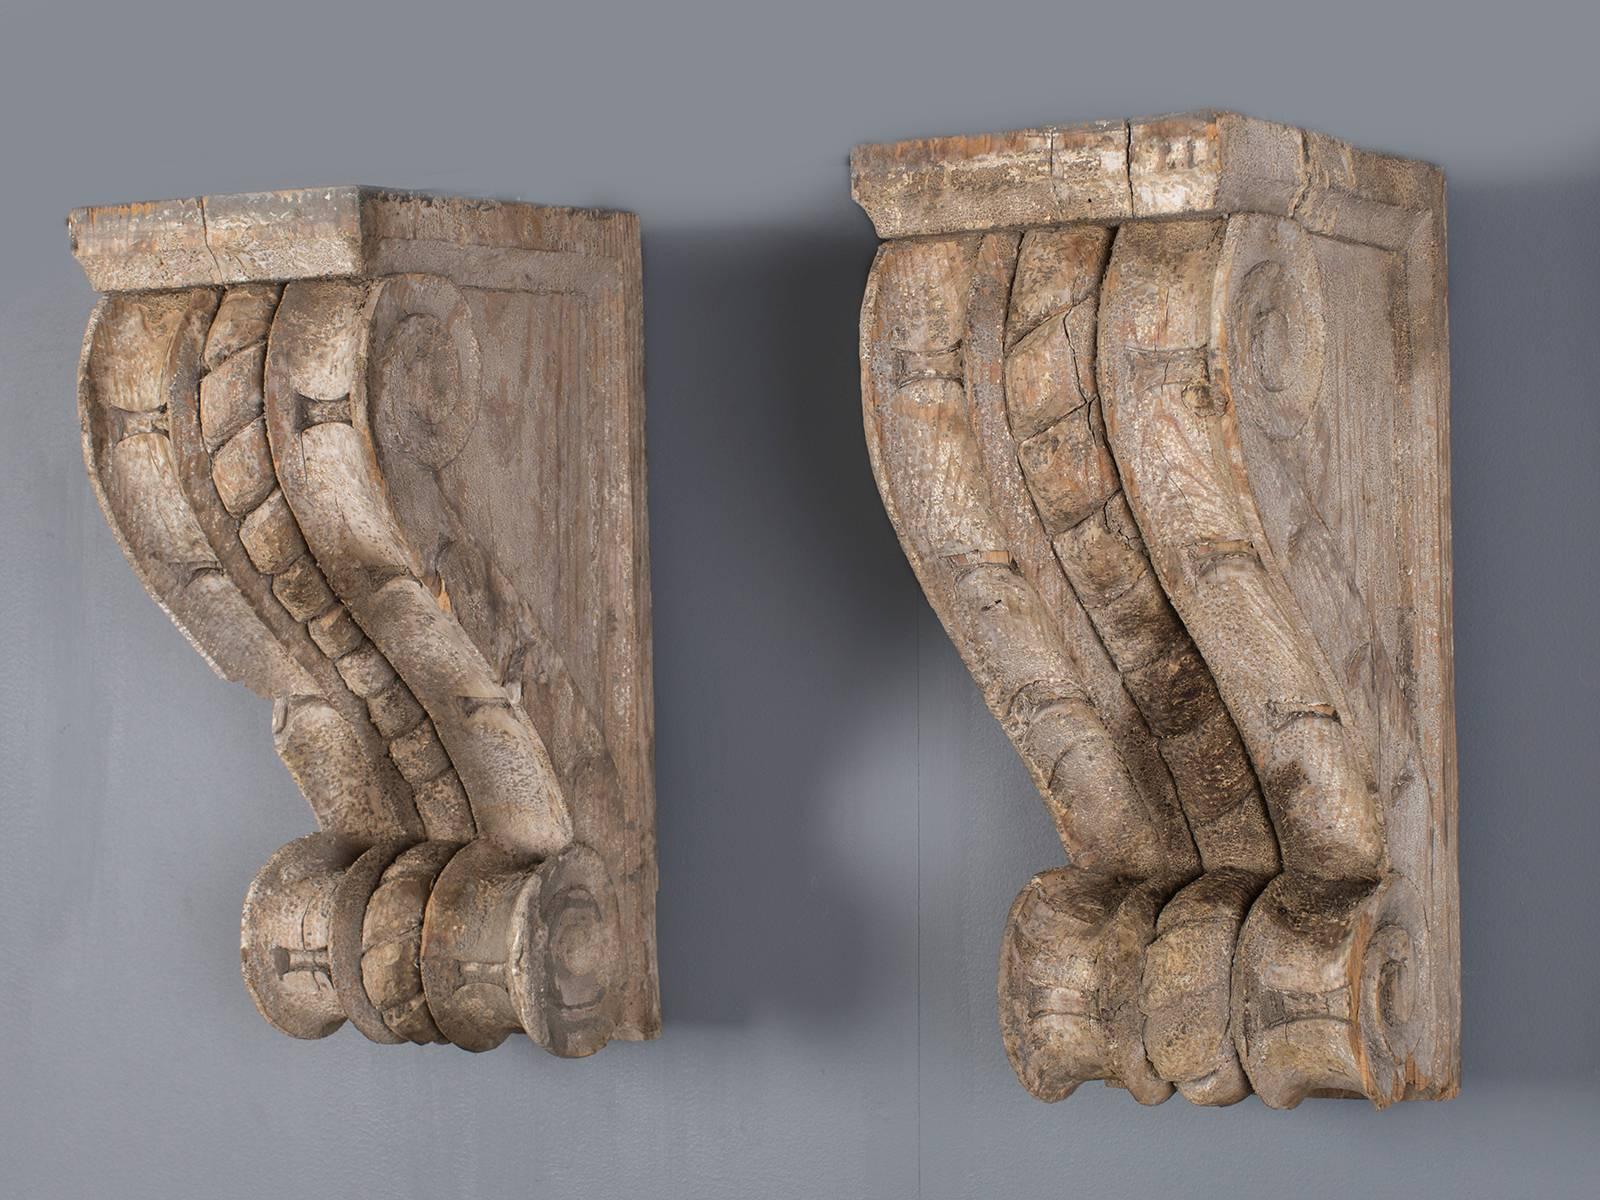 Receive our new selections direct from 1stdibs by email each week. Please click Follow Dealer below and see them first!

The original finish on this pair of antique French wall brackets or corbels, circa 1850 has a marvelous texture. The aged